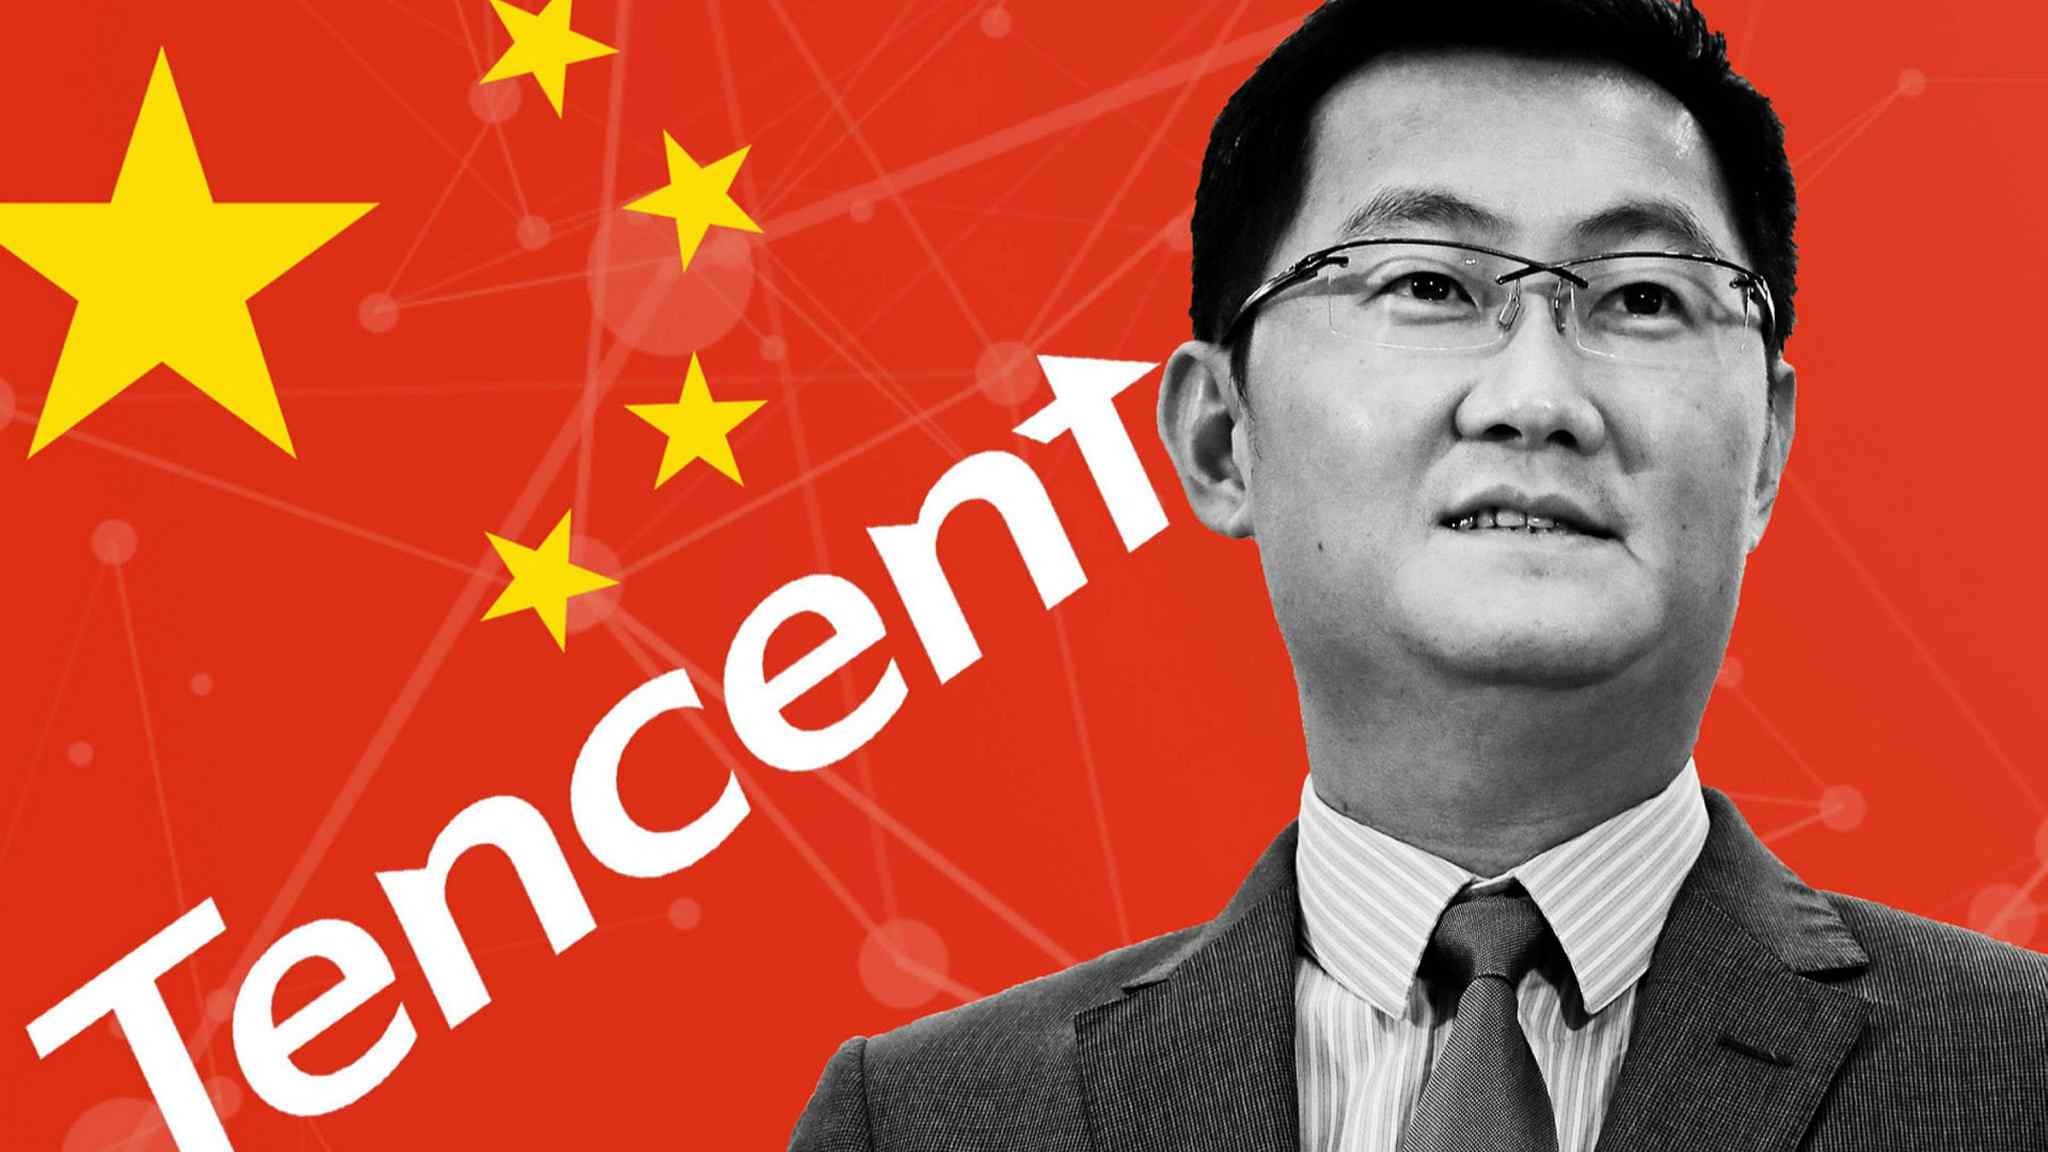 Tencent pursues quieter investment strategy amid China’s Big Tech crackdown